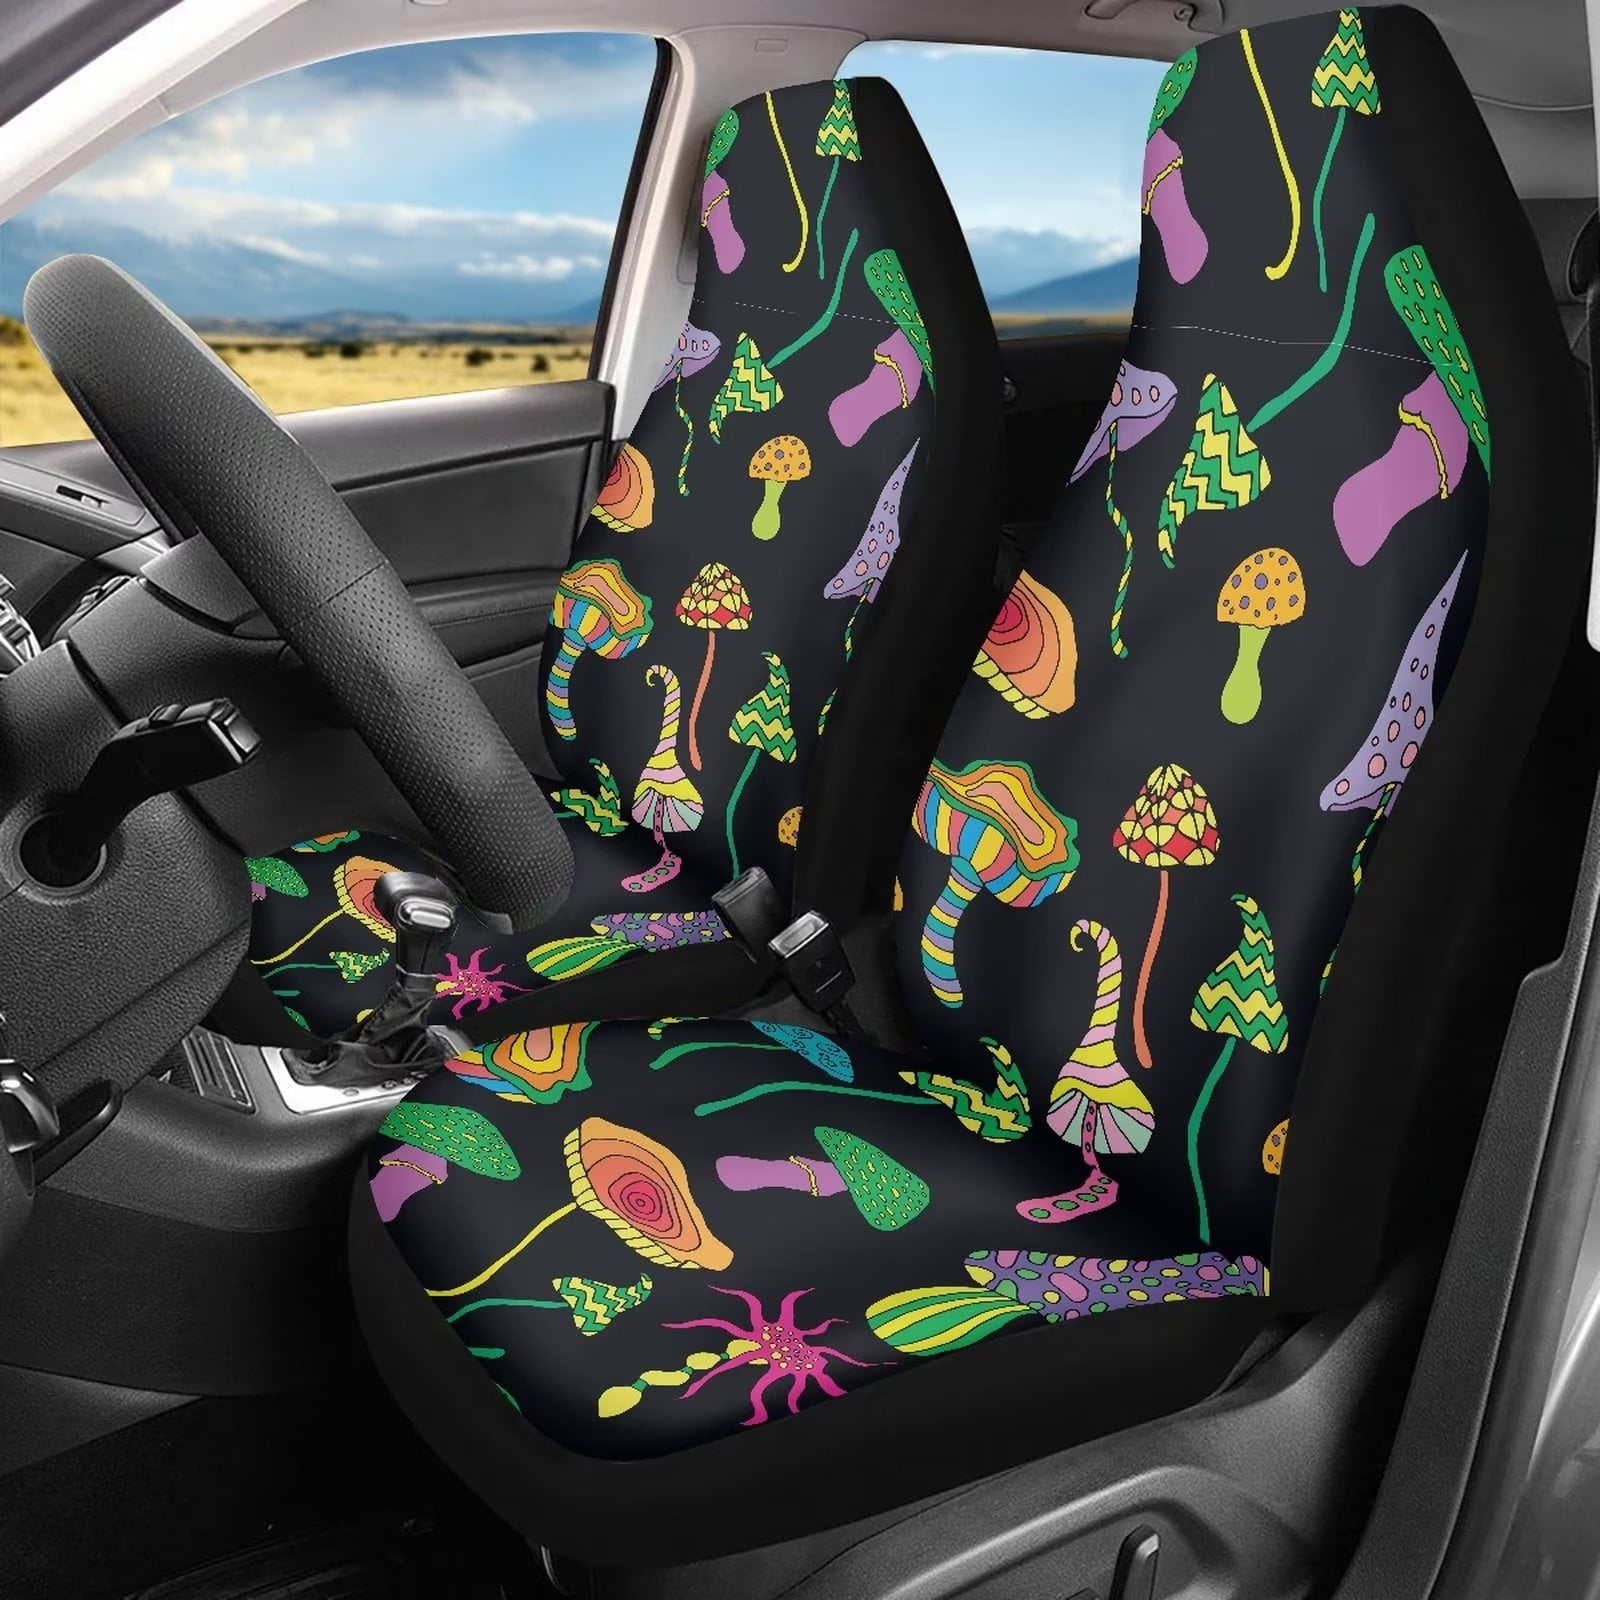 Soy Foam “Takes a Seat” in Automobile Interiors